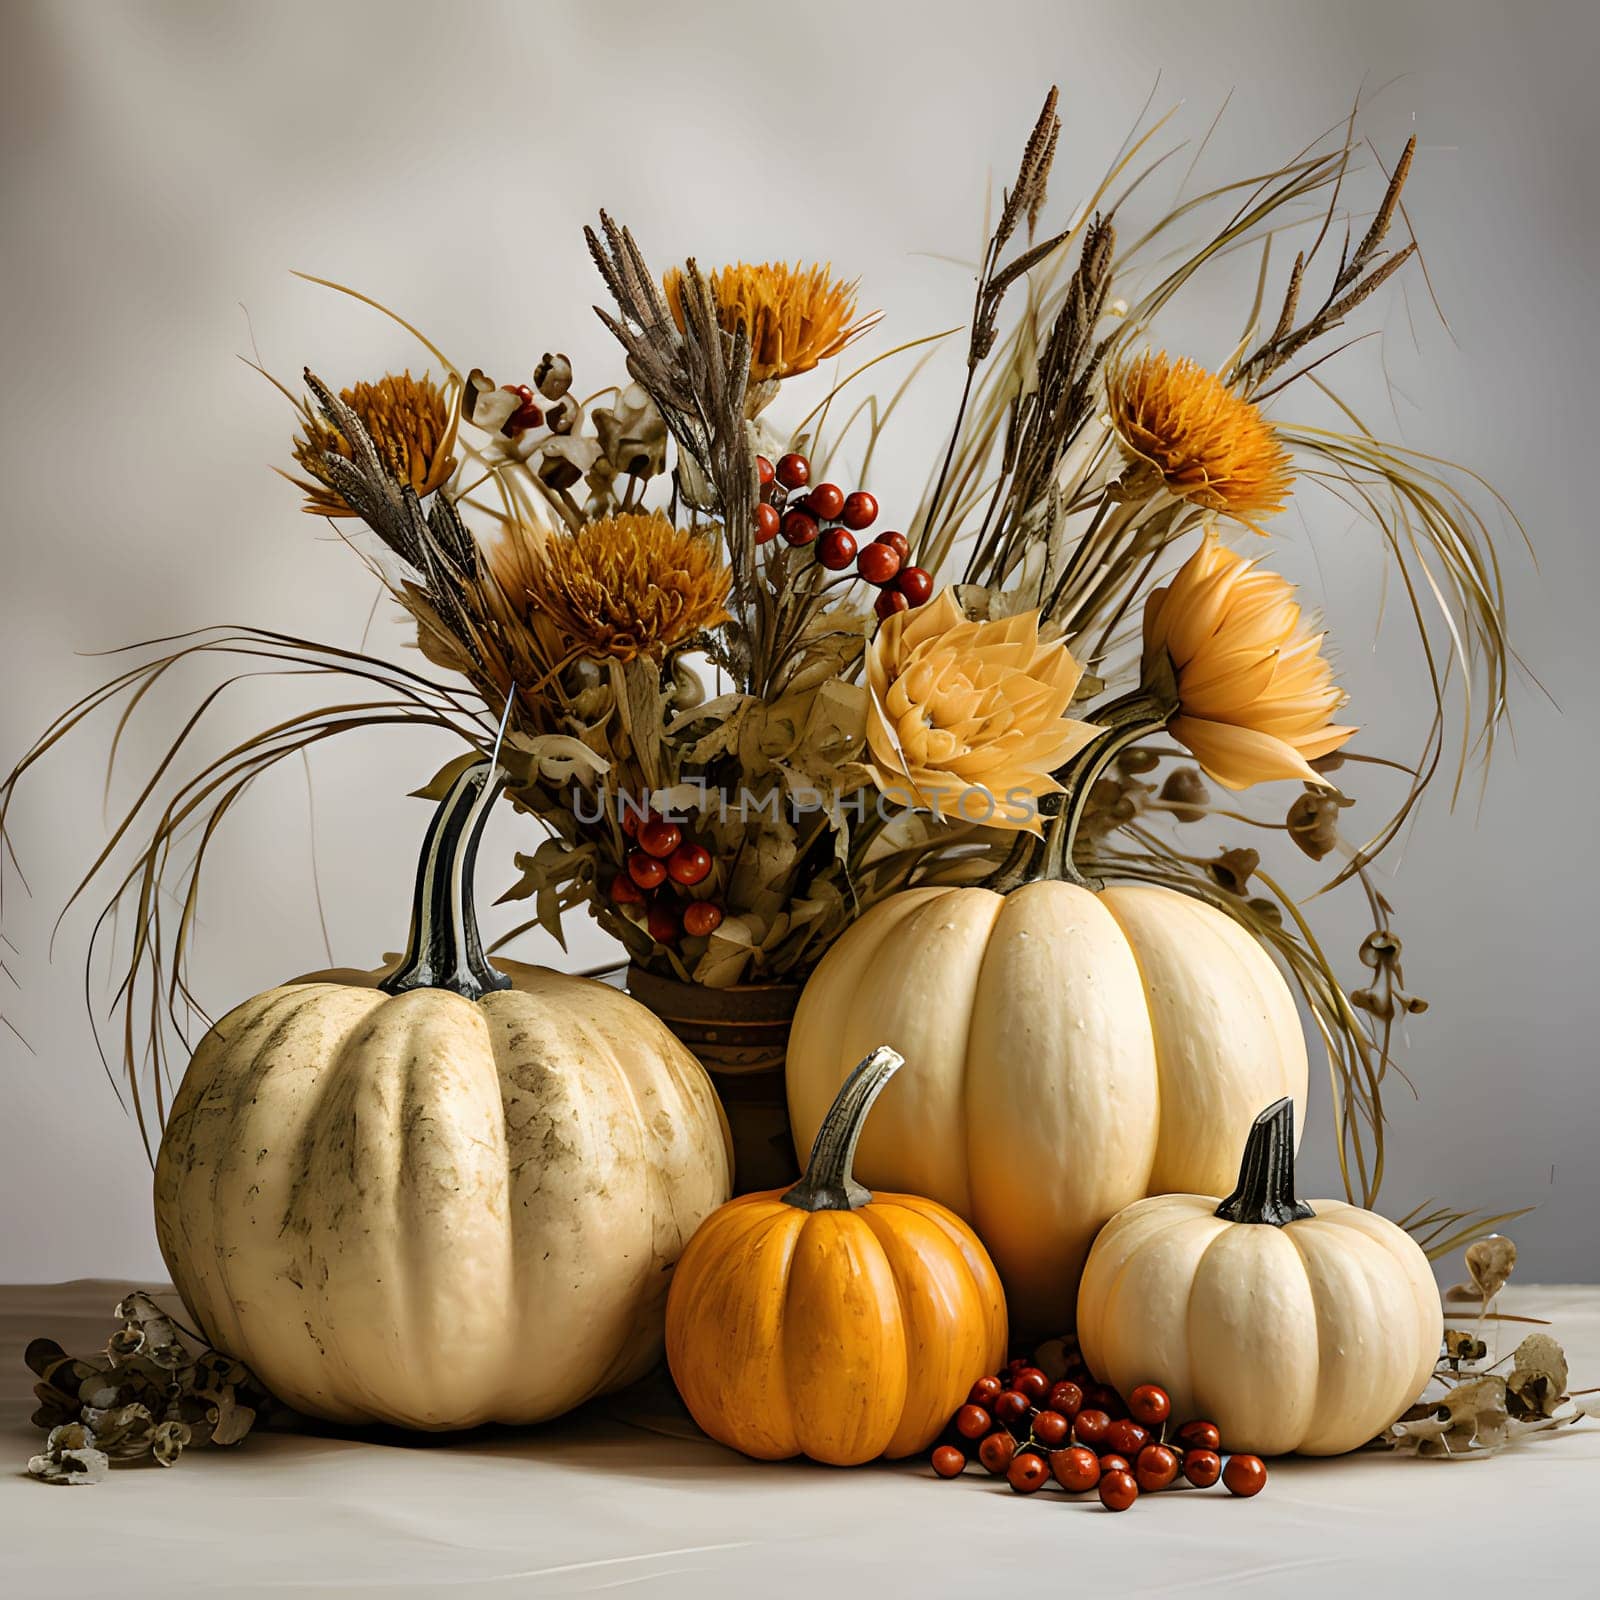 Elegantly arranged pumpkins, rowan trees and autumn flowers. Pumpkin as a dish of thanksgiving for the harvest. An atmosphere of joy and celebration.